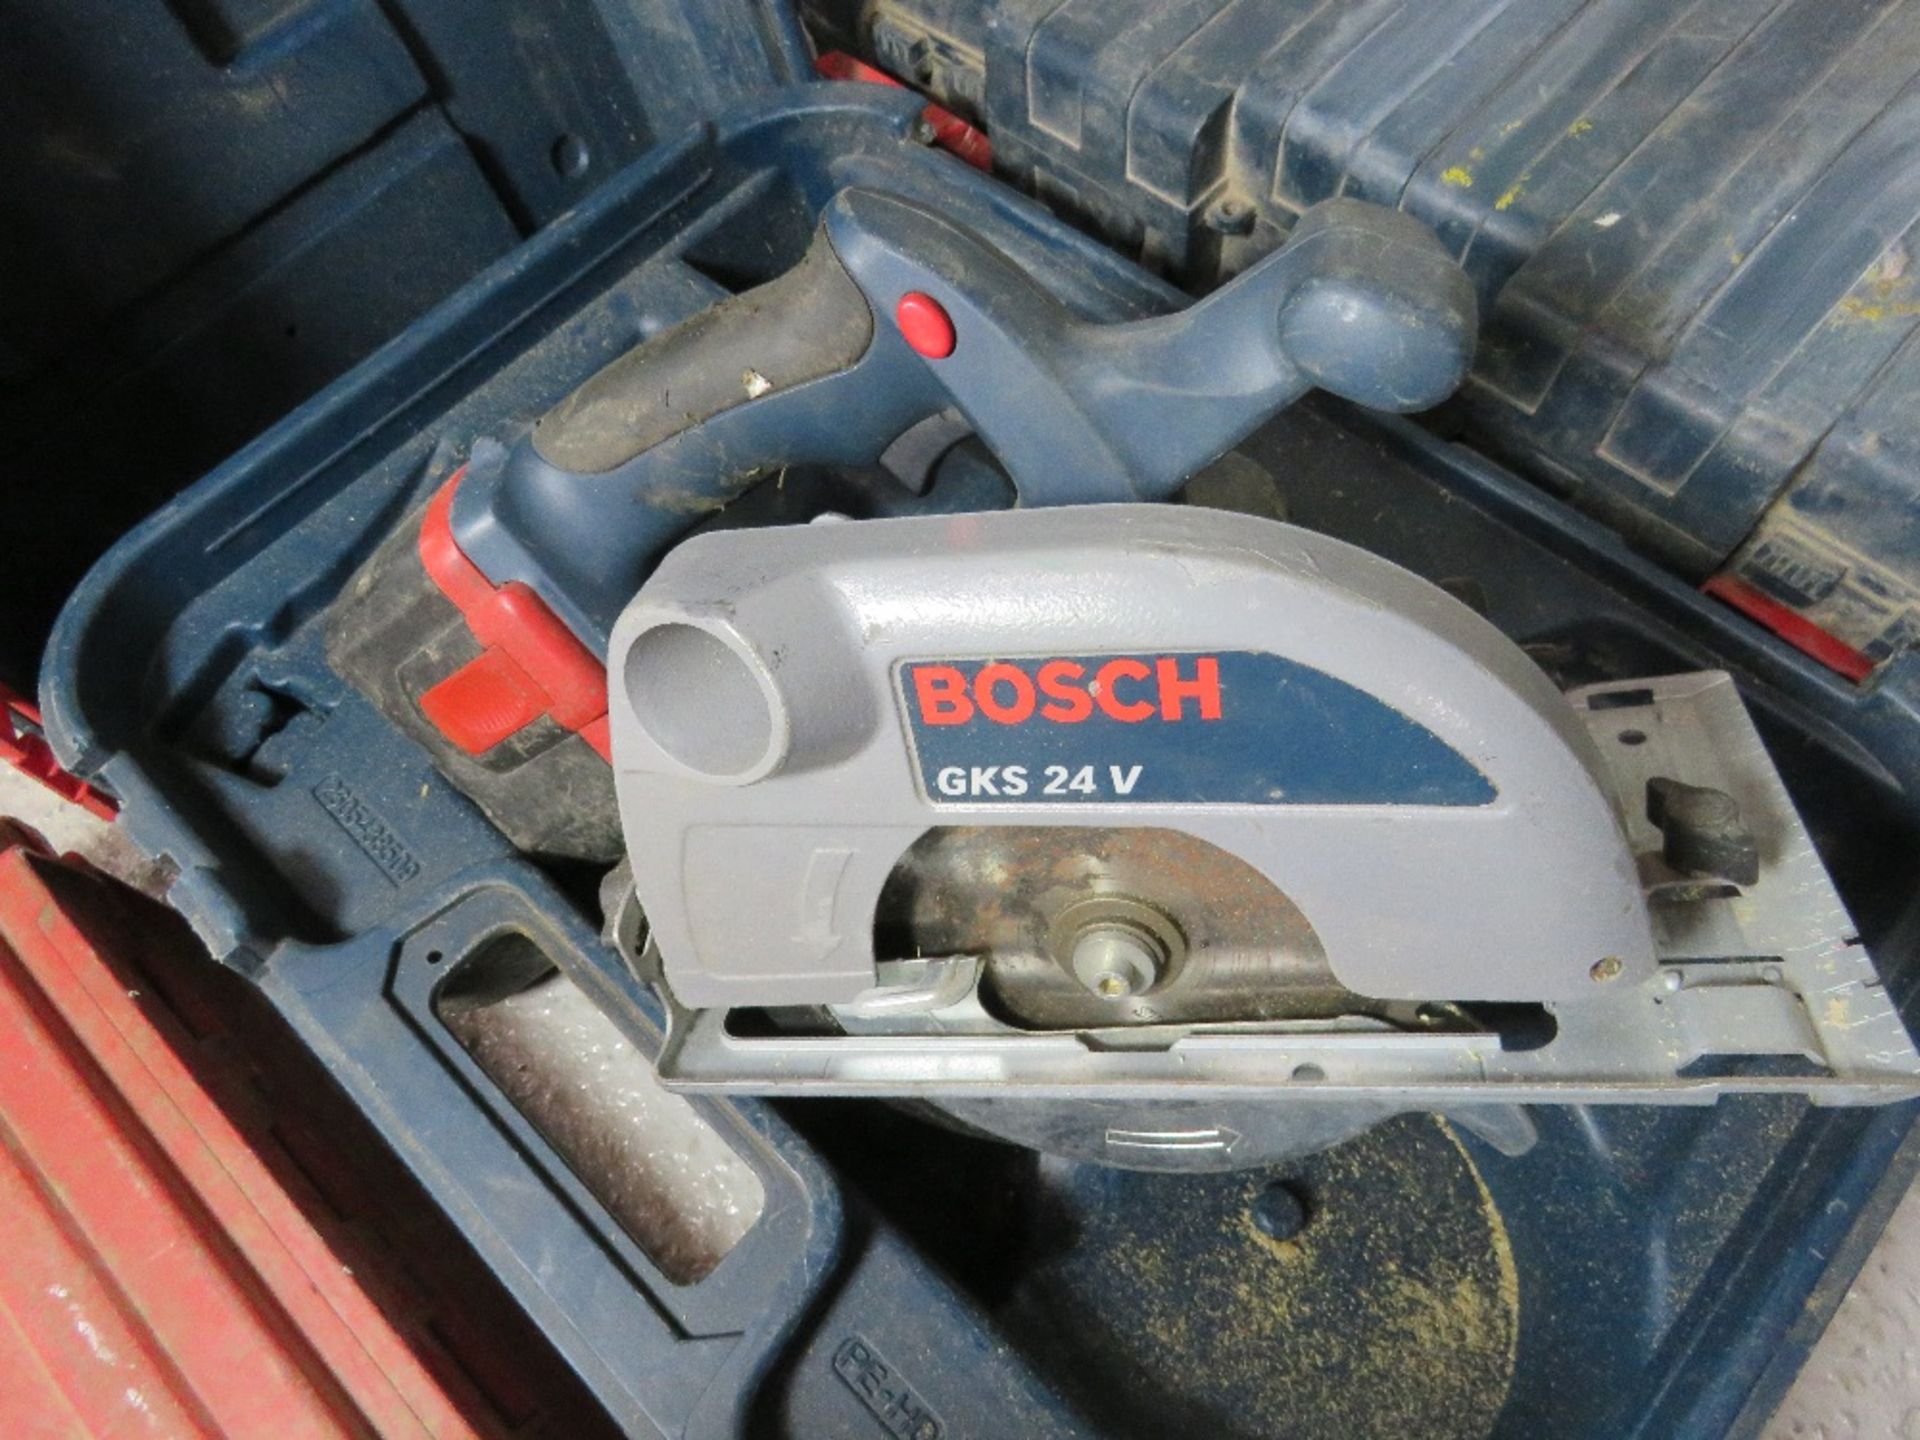 BOSCH BATTERY CIRCULAR SAW, NO CHARGER. - Image 2 of 2